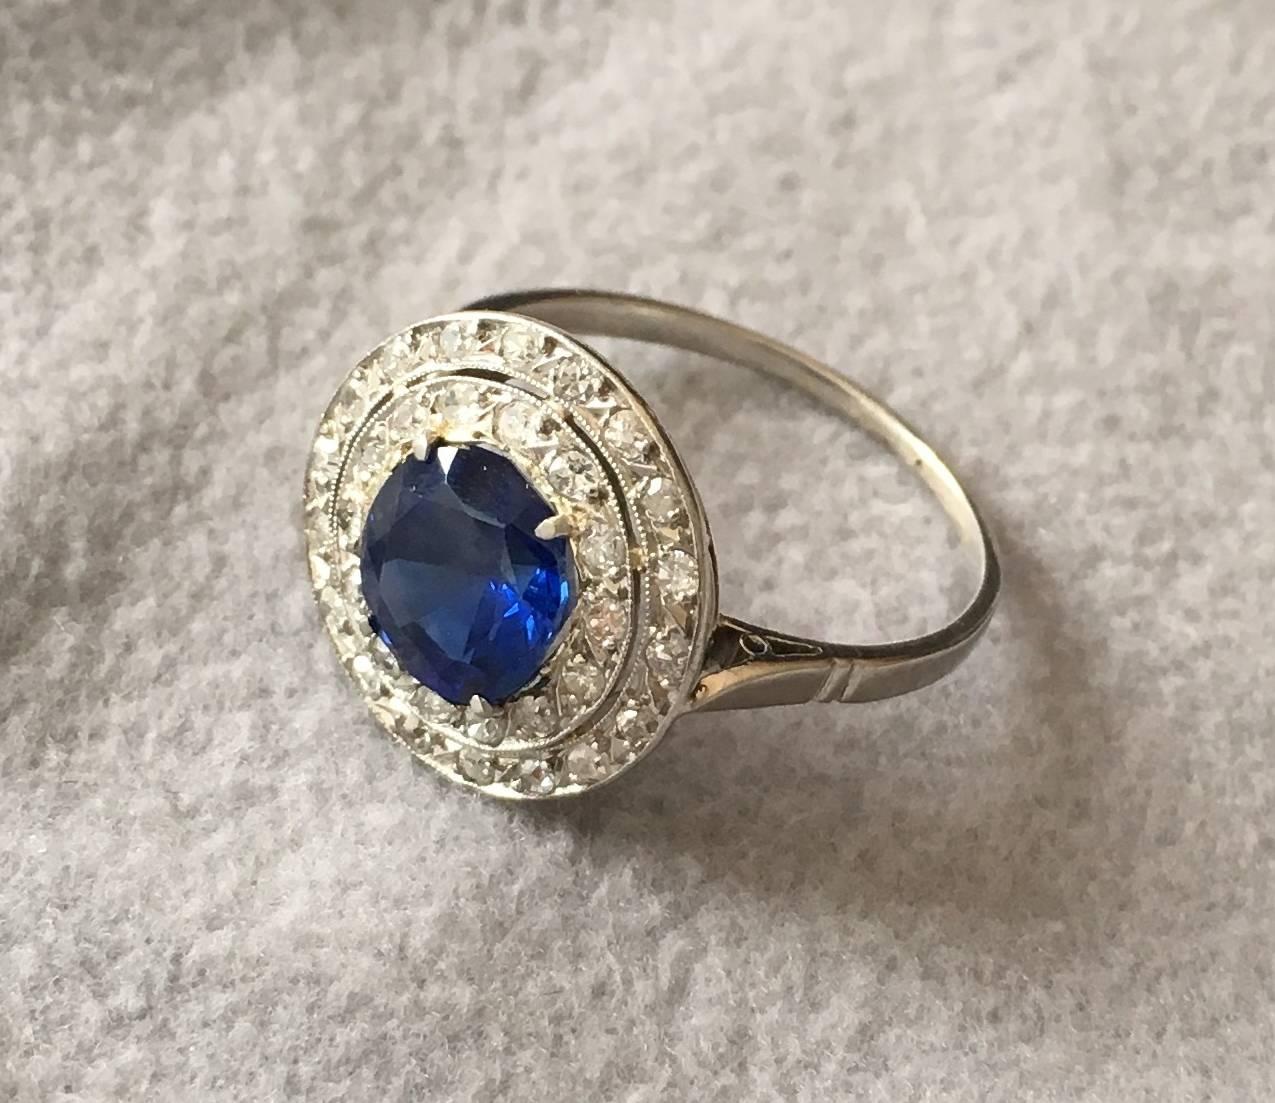 A wonderful Edwardian ring with a rare natural unheated Burma sapphire in the centre. The sapphire is a round brilliant cut stone and has a deep blue colour with a beautiful crystal. It comes with a certificate from the Swiss gem lab SSEF, stating